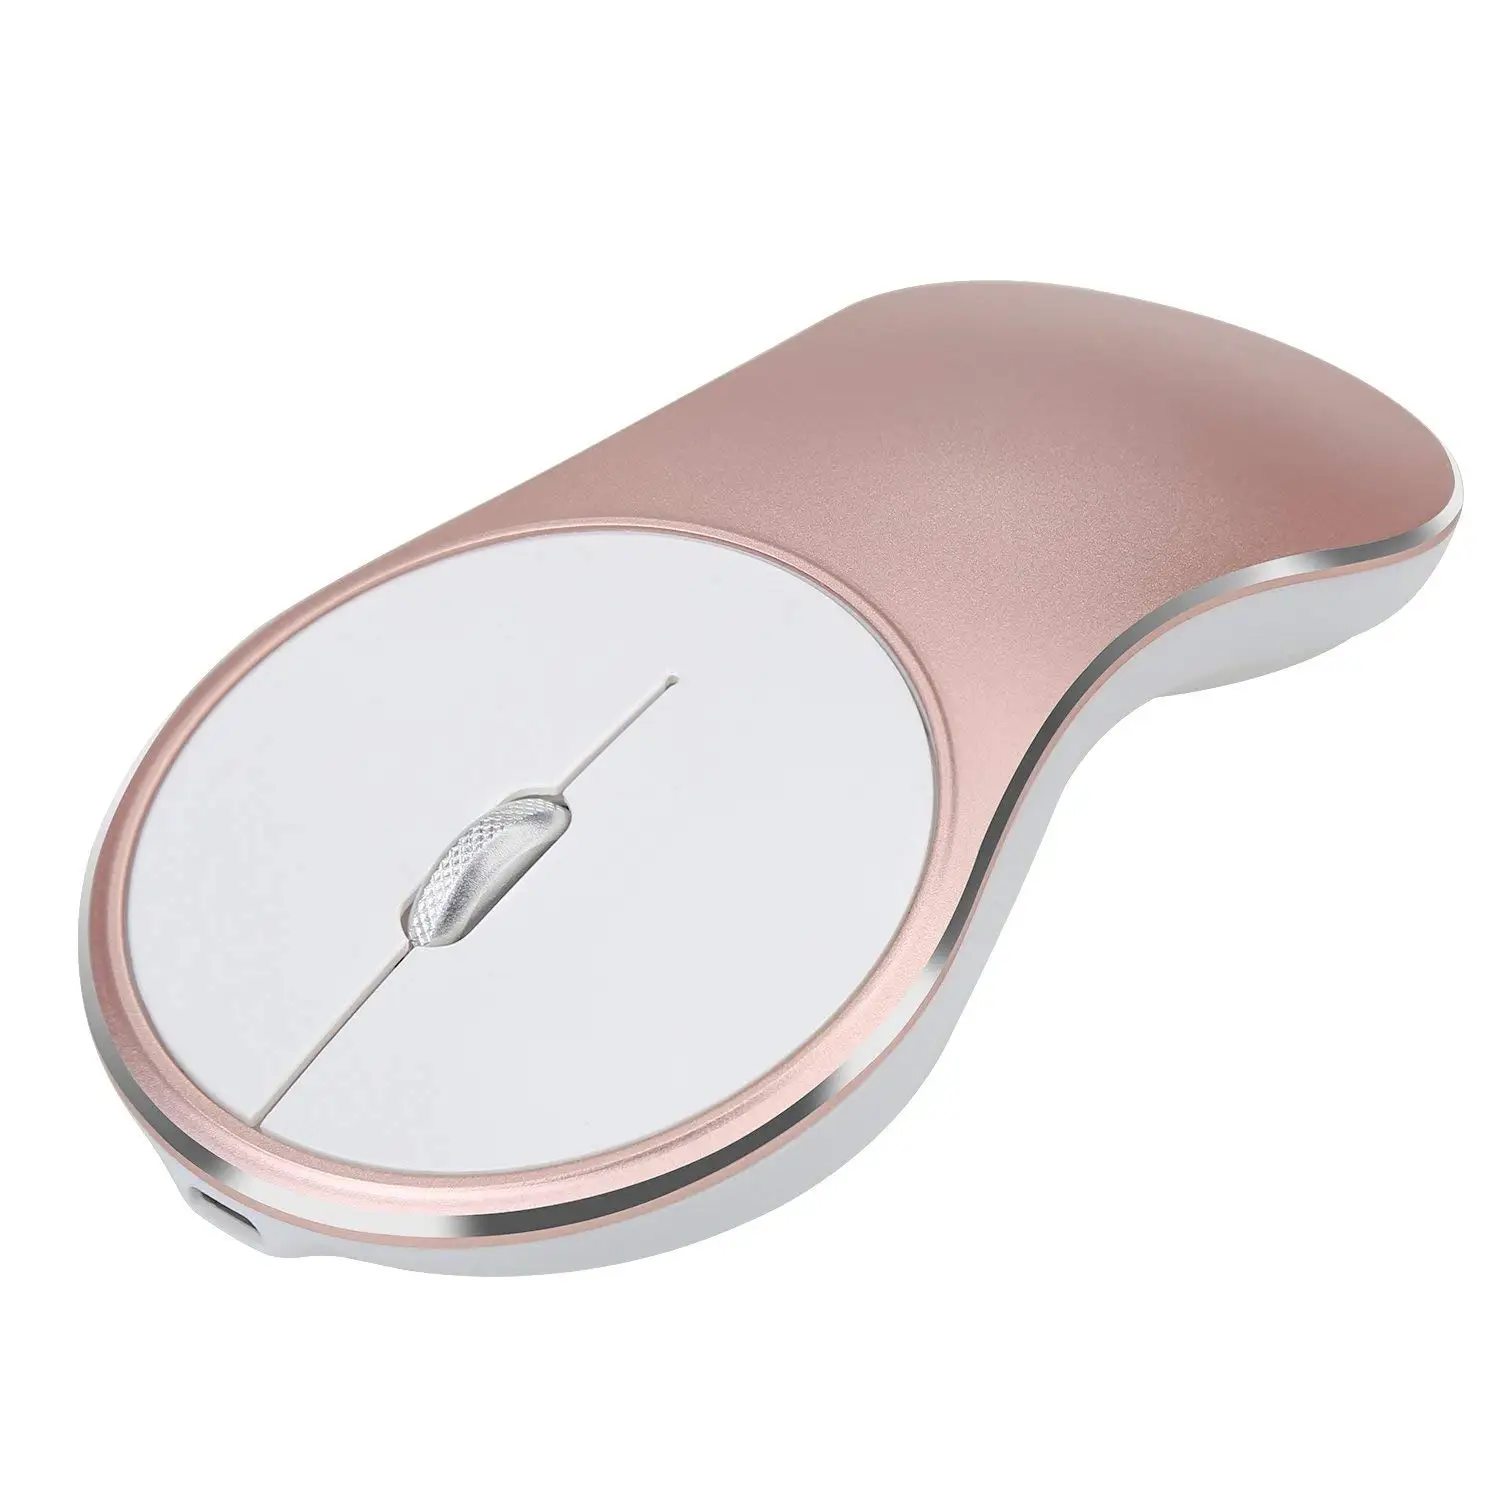 

2.4ghz Mini Wireless Mouse Silent Click Compact Soundless Optical Mice With Nano USB Receiver For Laptop PC And Mac (Rose Gold